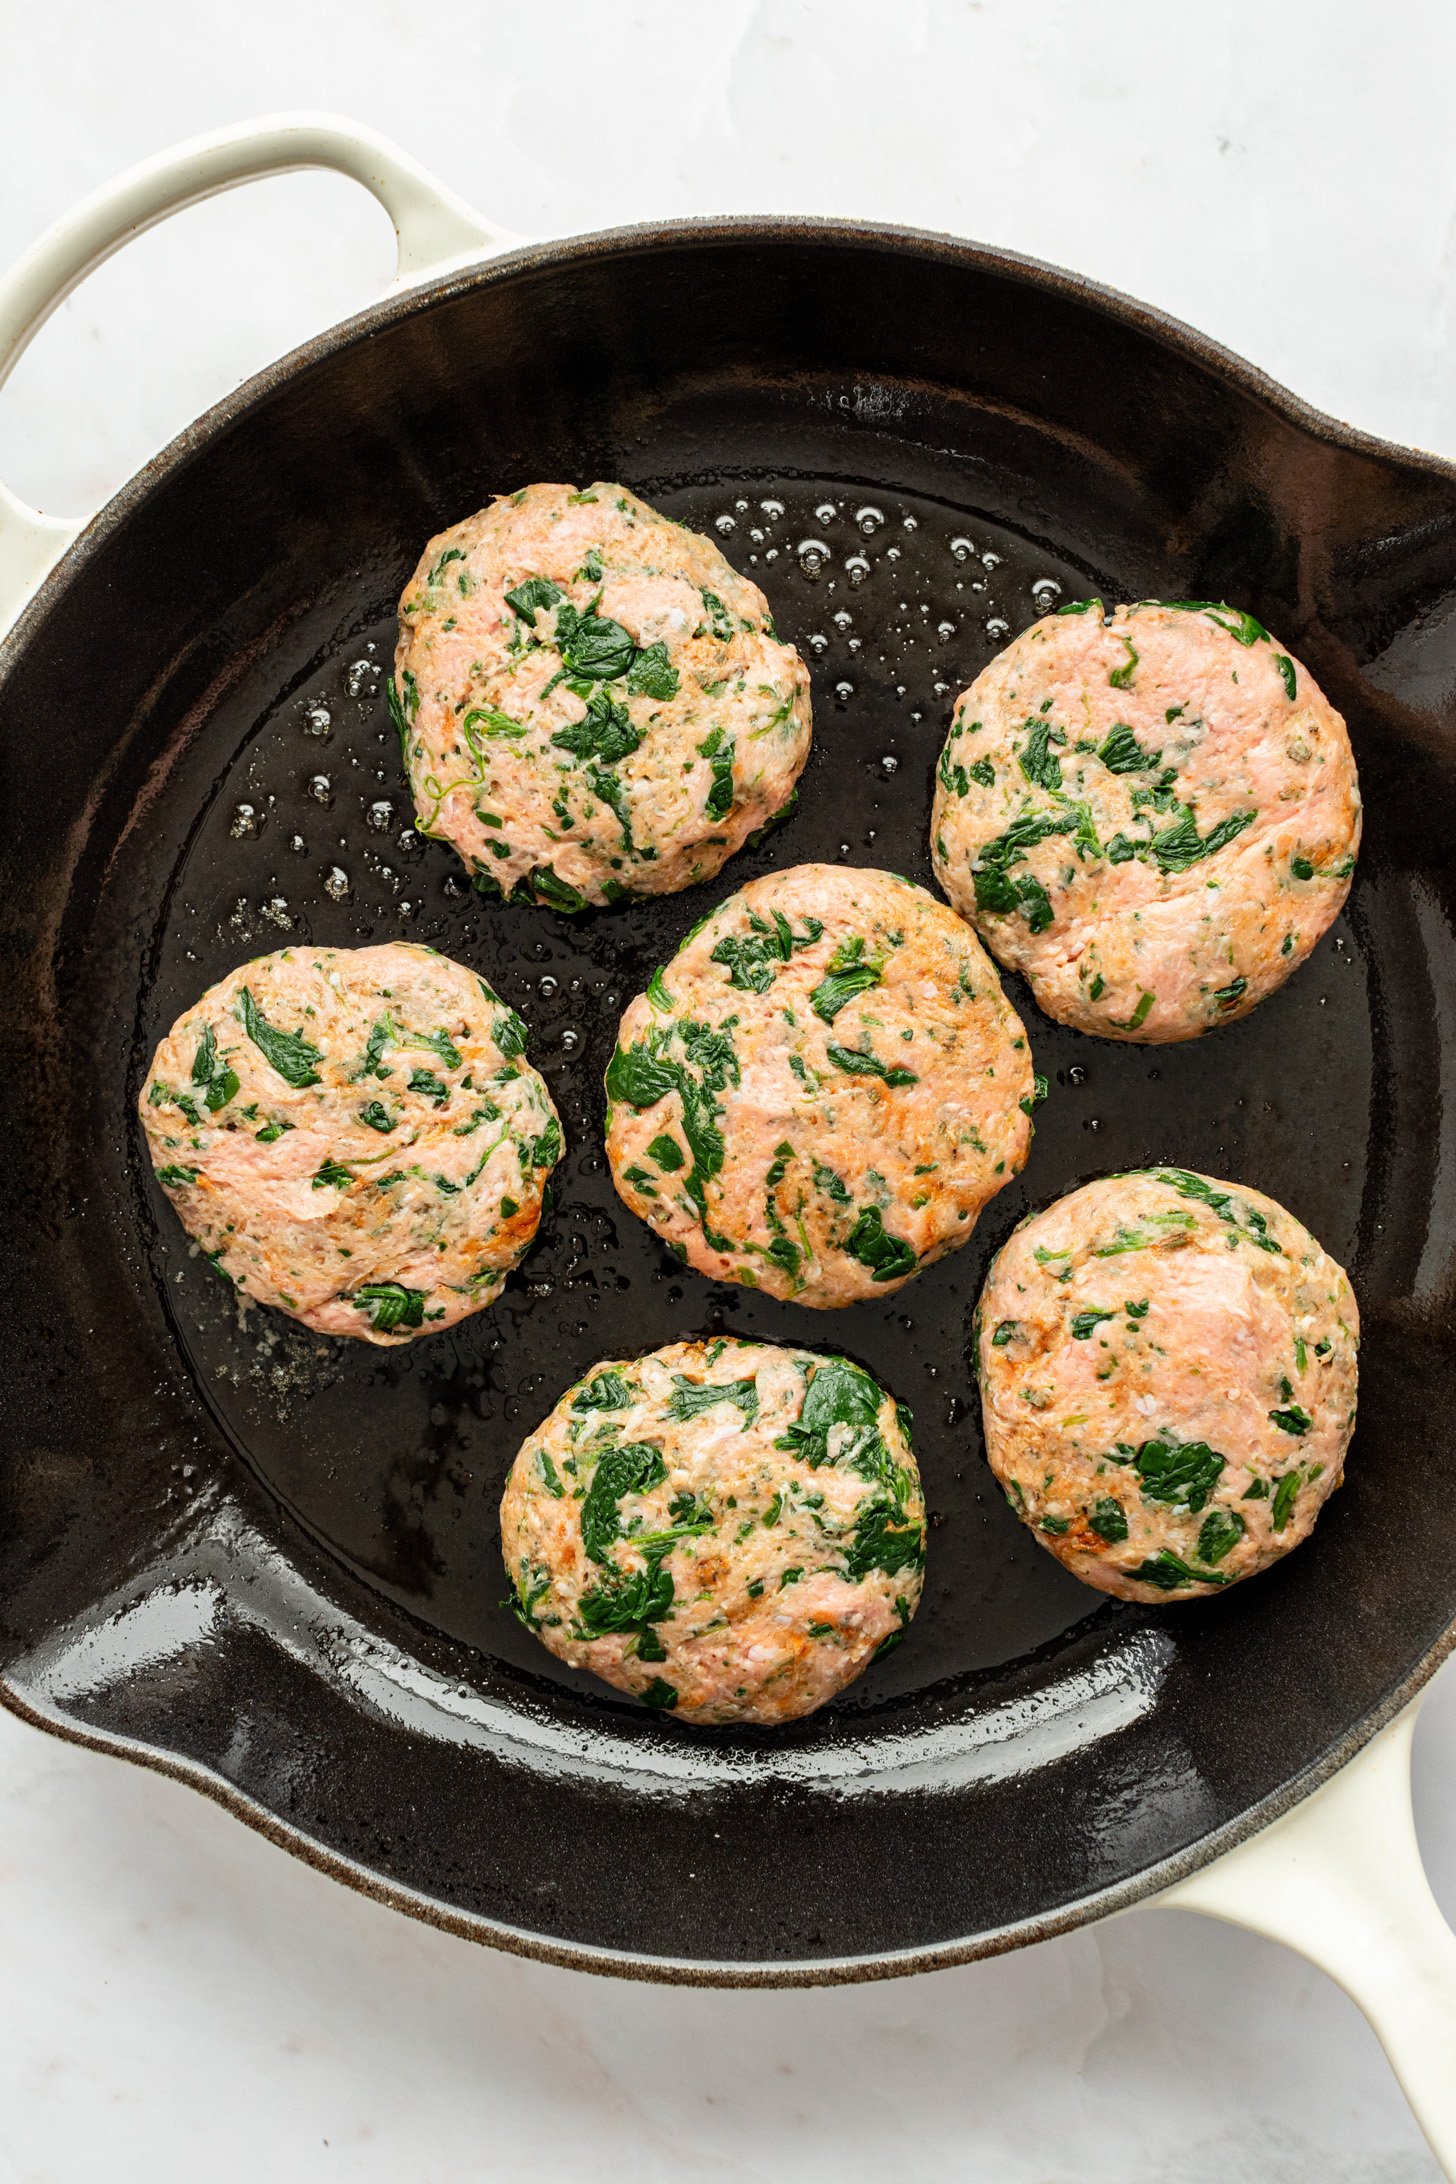 Six raw ground turkey and spinach breakfast sausage patties and oil in a cast iron pan sitting on a white countertop.